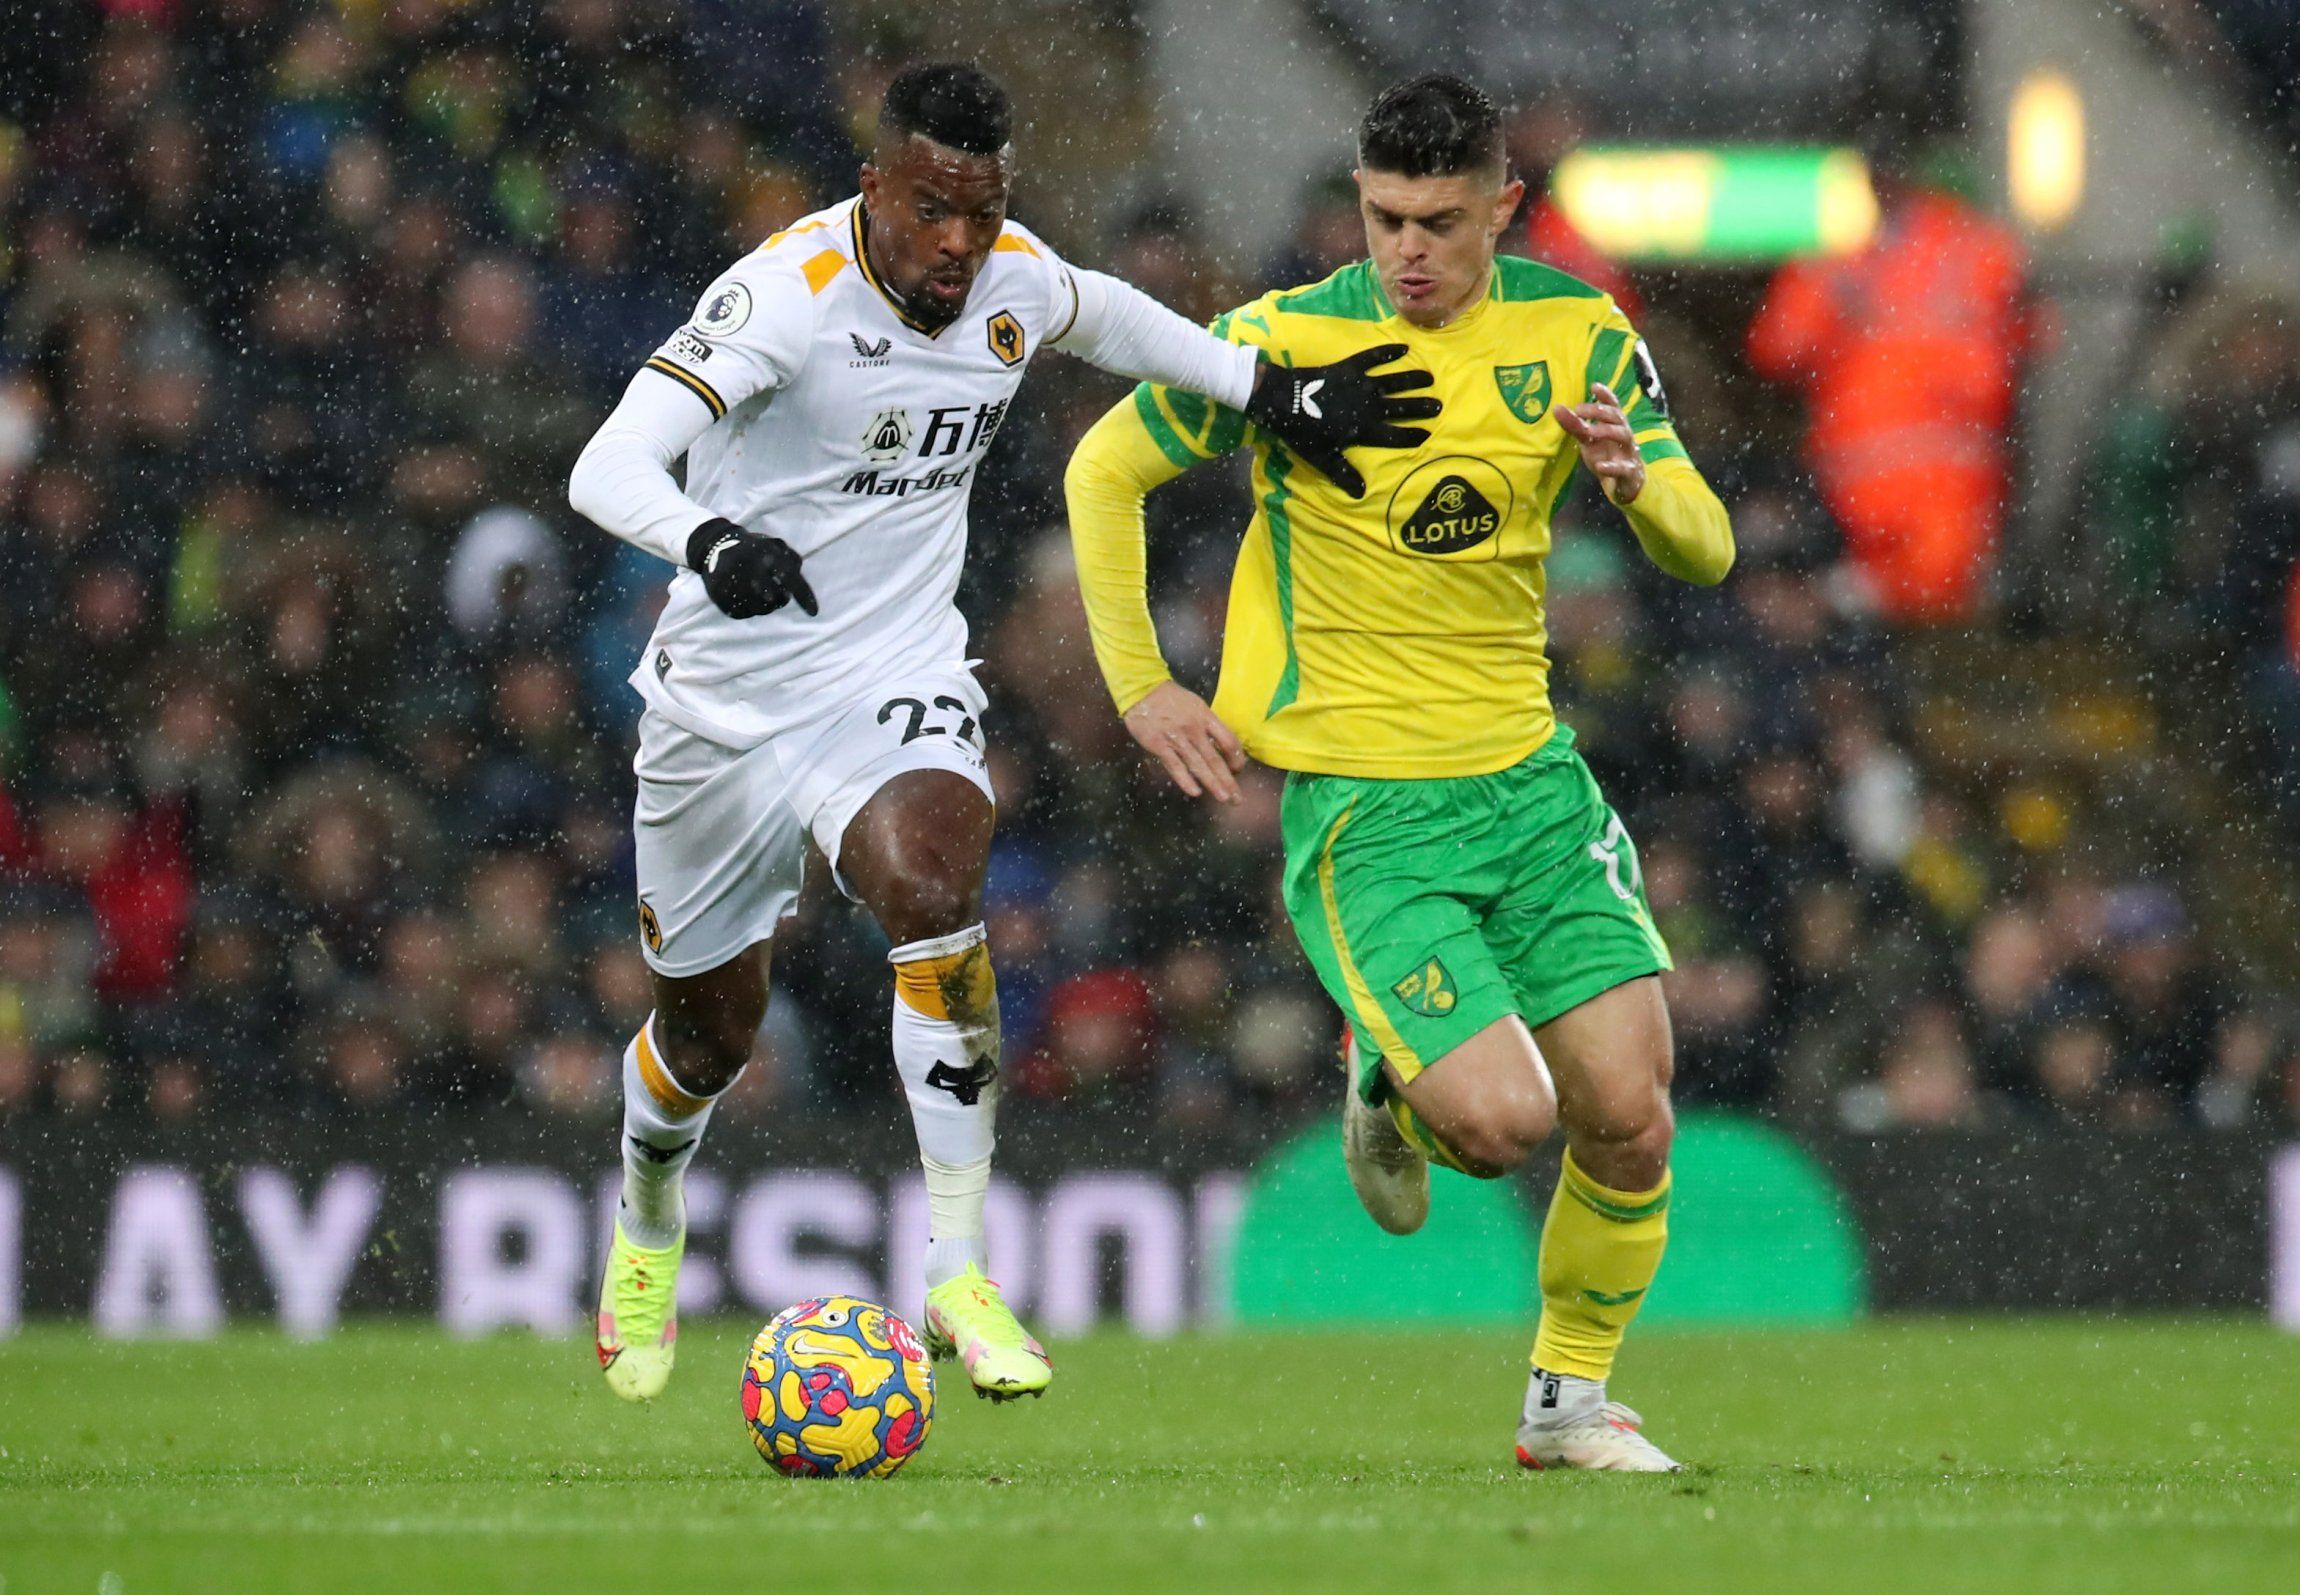 Bruno Lage, Fosun, Jeff Shi, Molineux, The Old Gold, Wolves, Wolves fans, Wolves info, Wolves latest, Wolves news, Wolves updates, WWFC, WWFC news, WWFC update, Premier League, Premier League news, Wolverhampton Wanderers, Norwich City, Nelson Semedo, 
